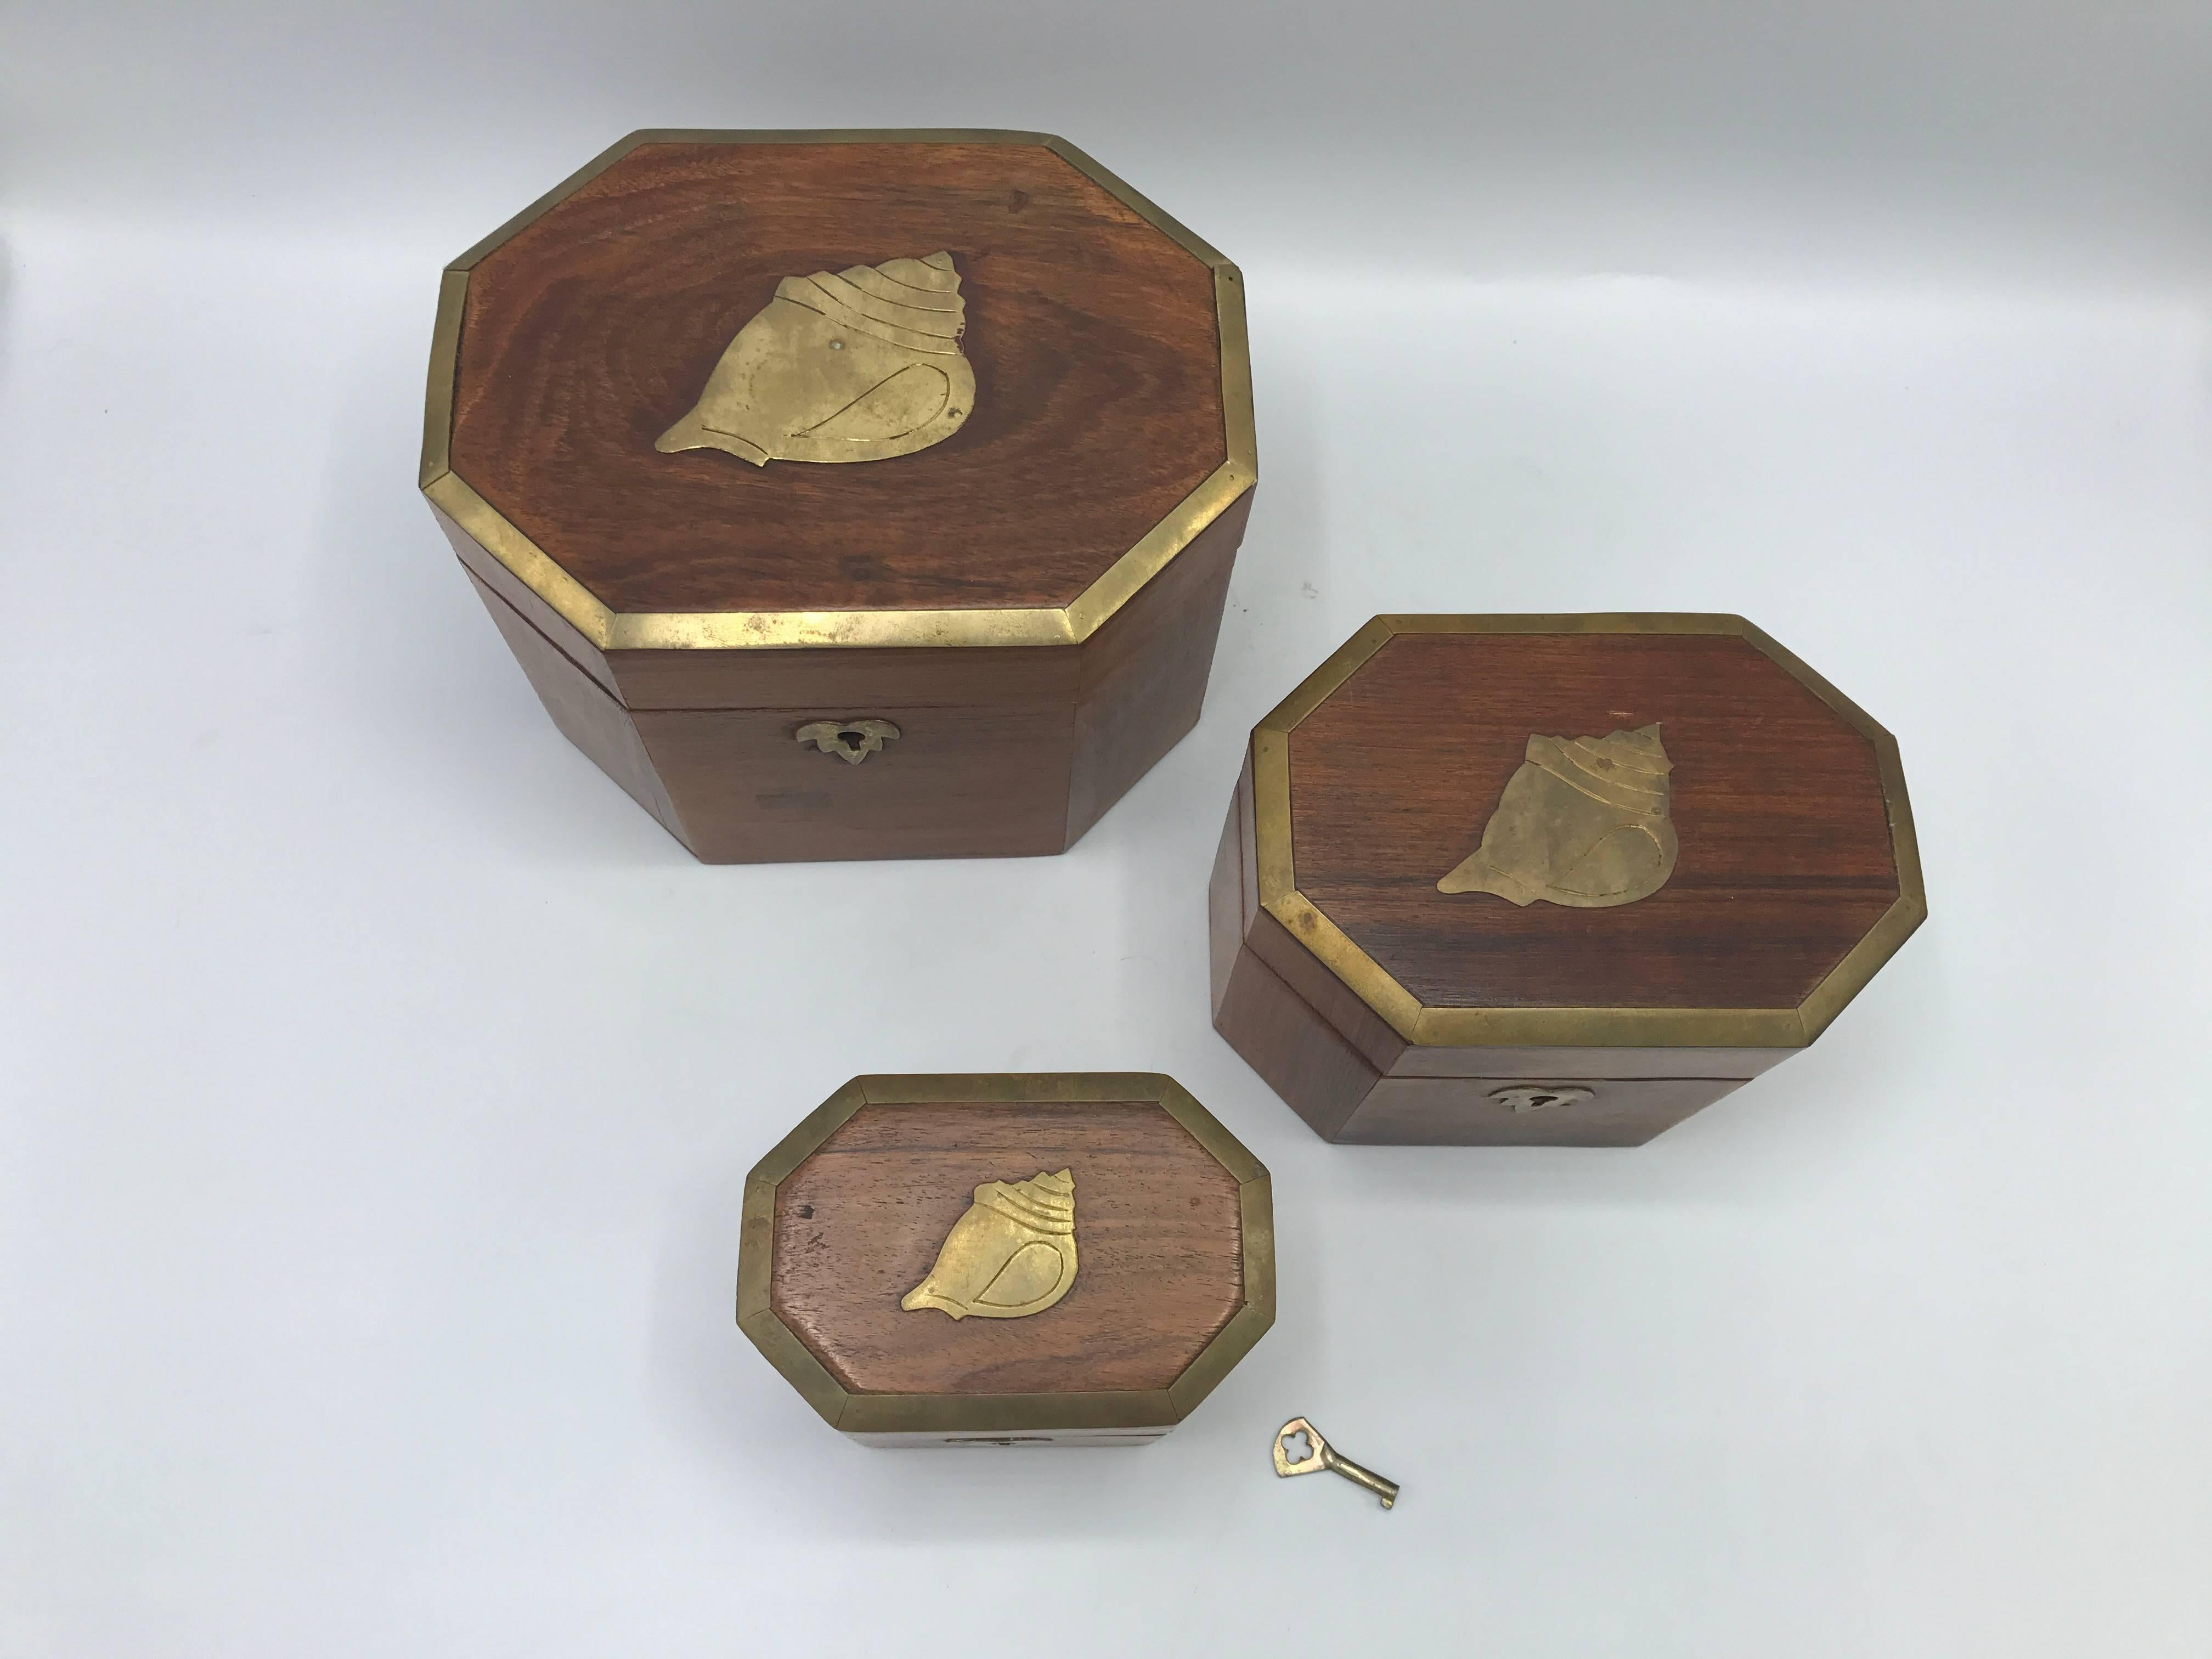 Offered is a gorgeous, set of three, 1960s teak nesting boxes with brass seashell and border inlay. Includes original key. 

Large 5.5" x 7.25" x 5.5"

Medium 4.5" x 6" x 4.25"

Small 3.5" x 4.5" x